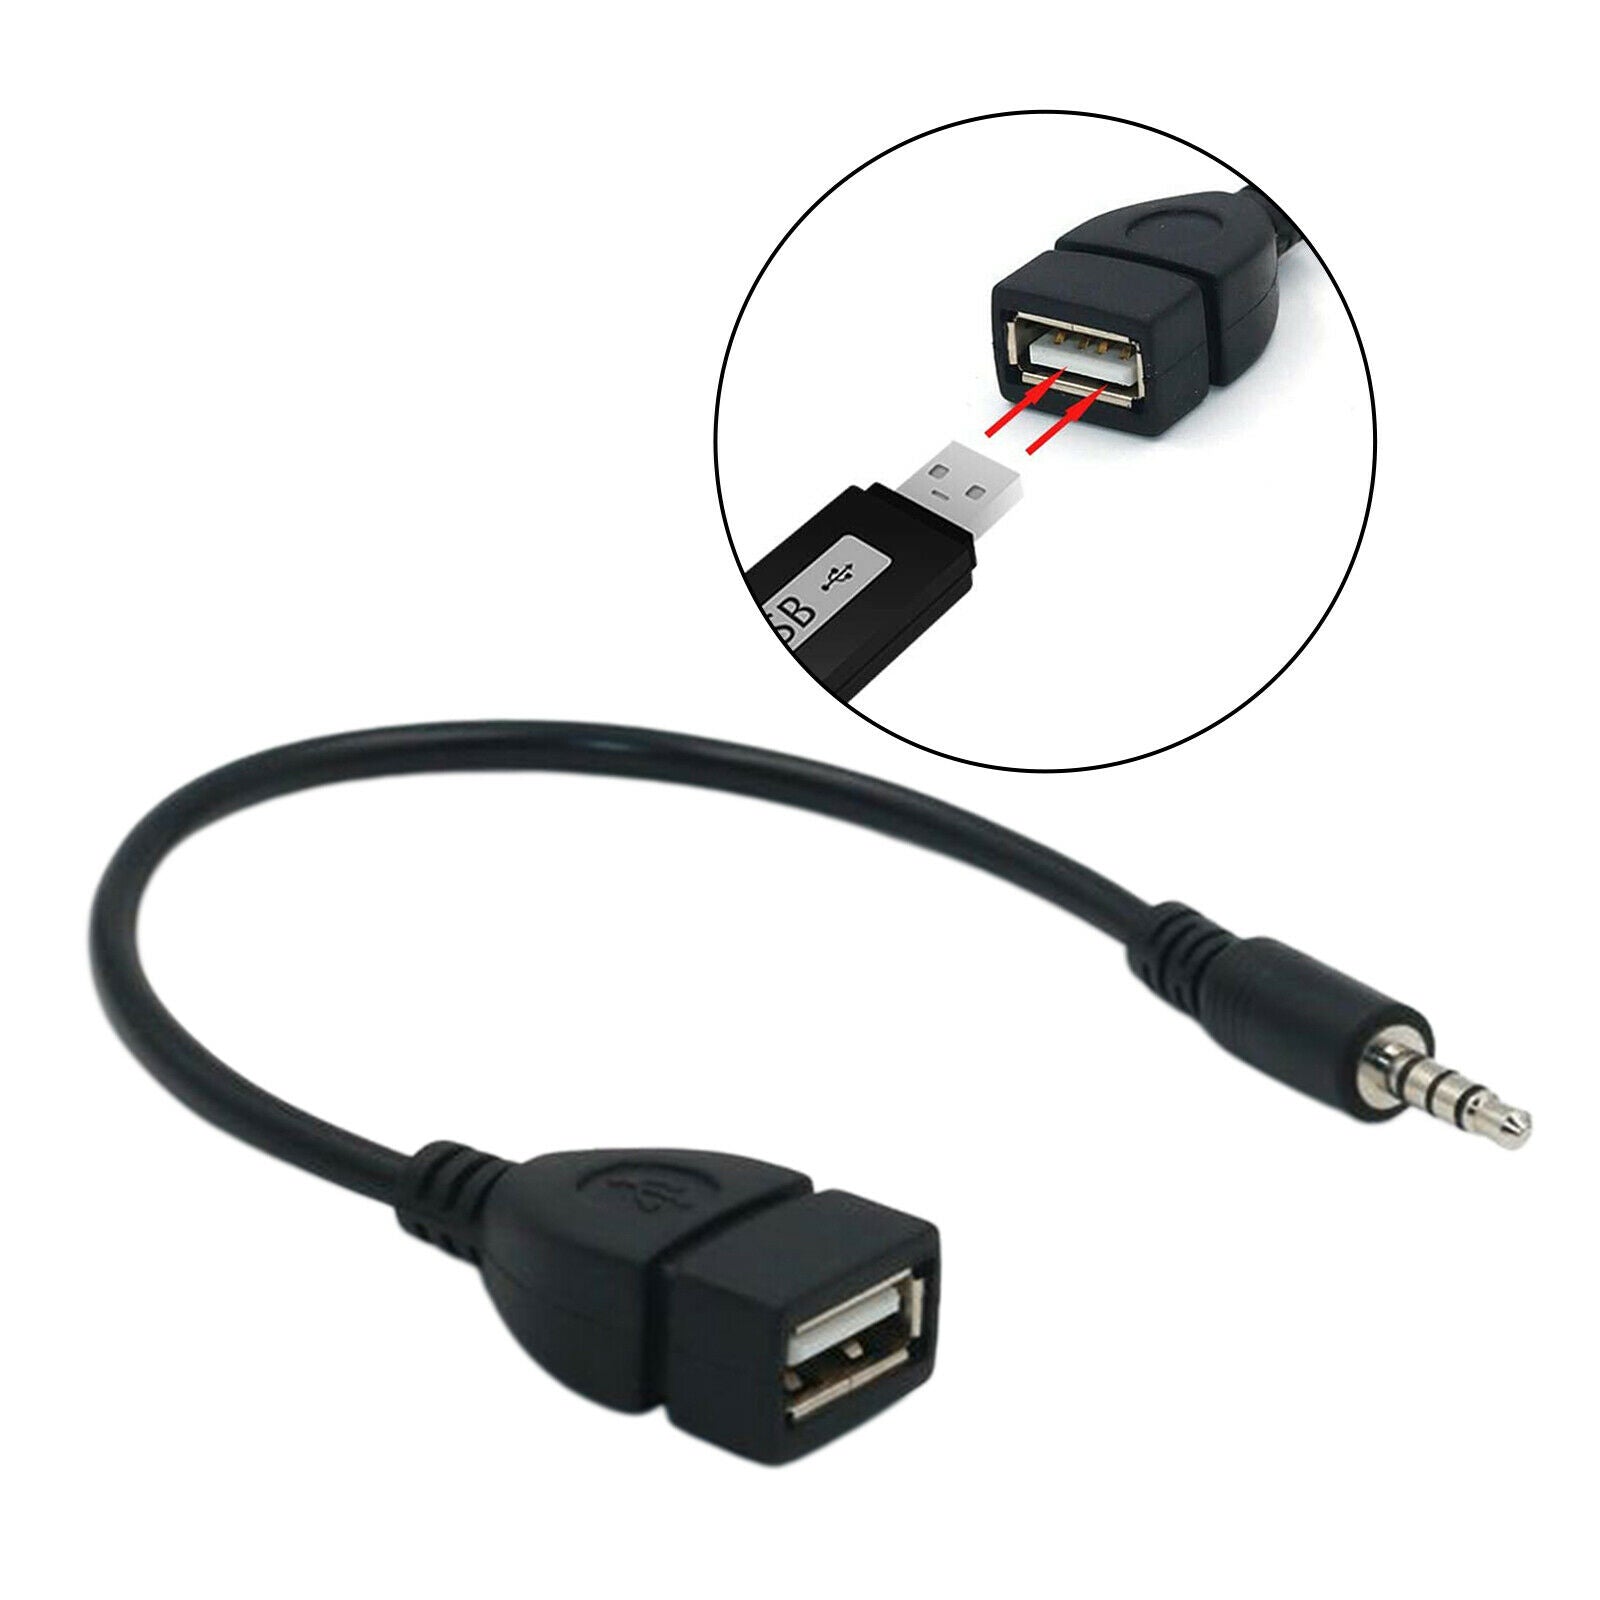 20cm 7.9" 3.5mm Male Audio AUX to USB Female Converter Adapter Cable Cord